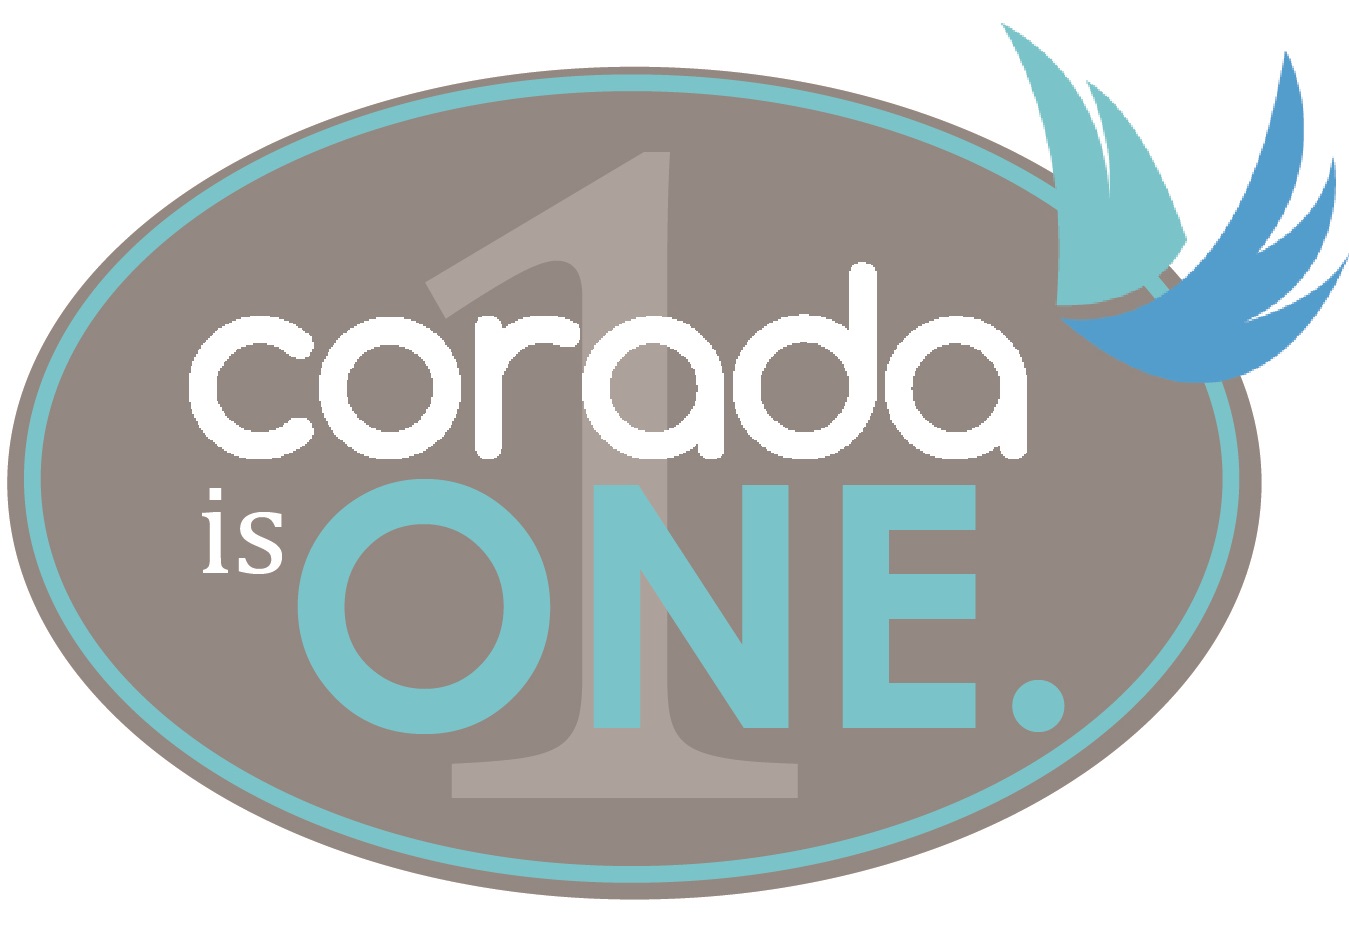 corada logo with number one